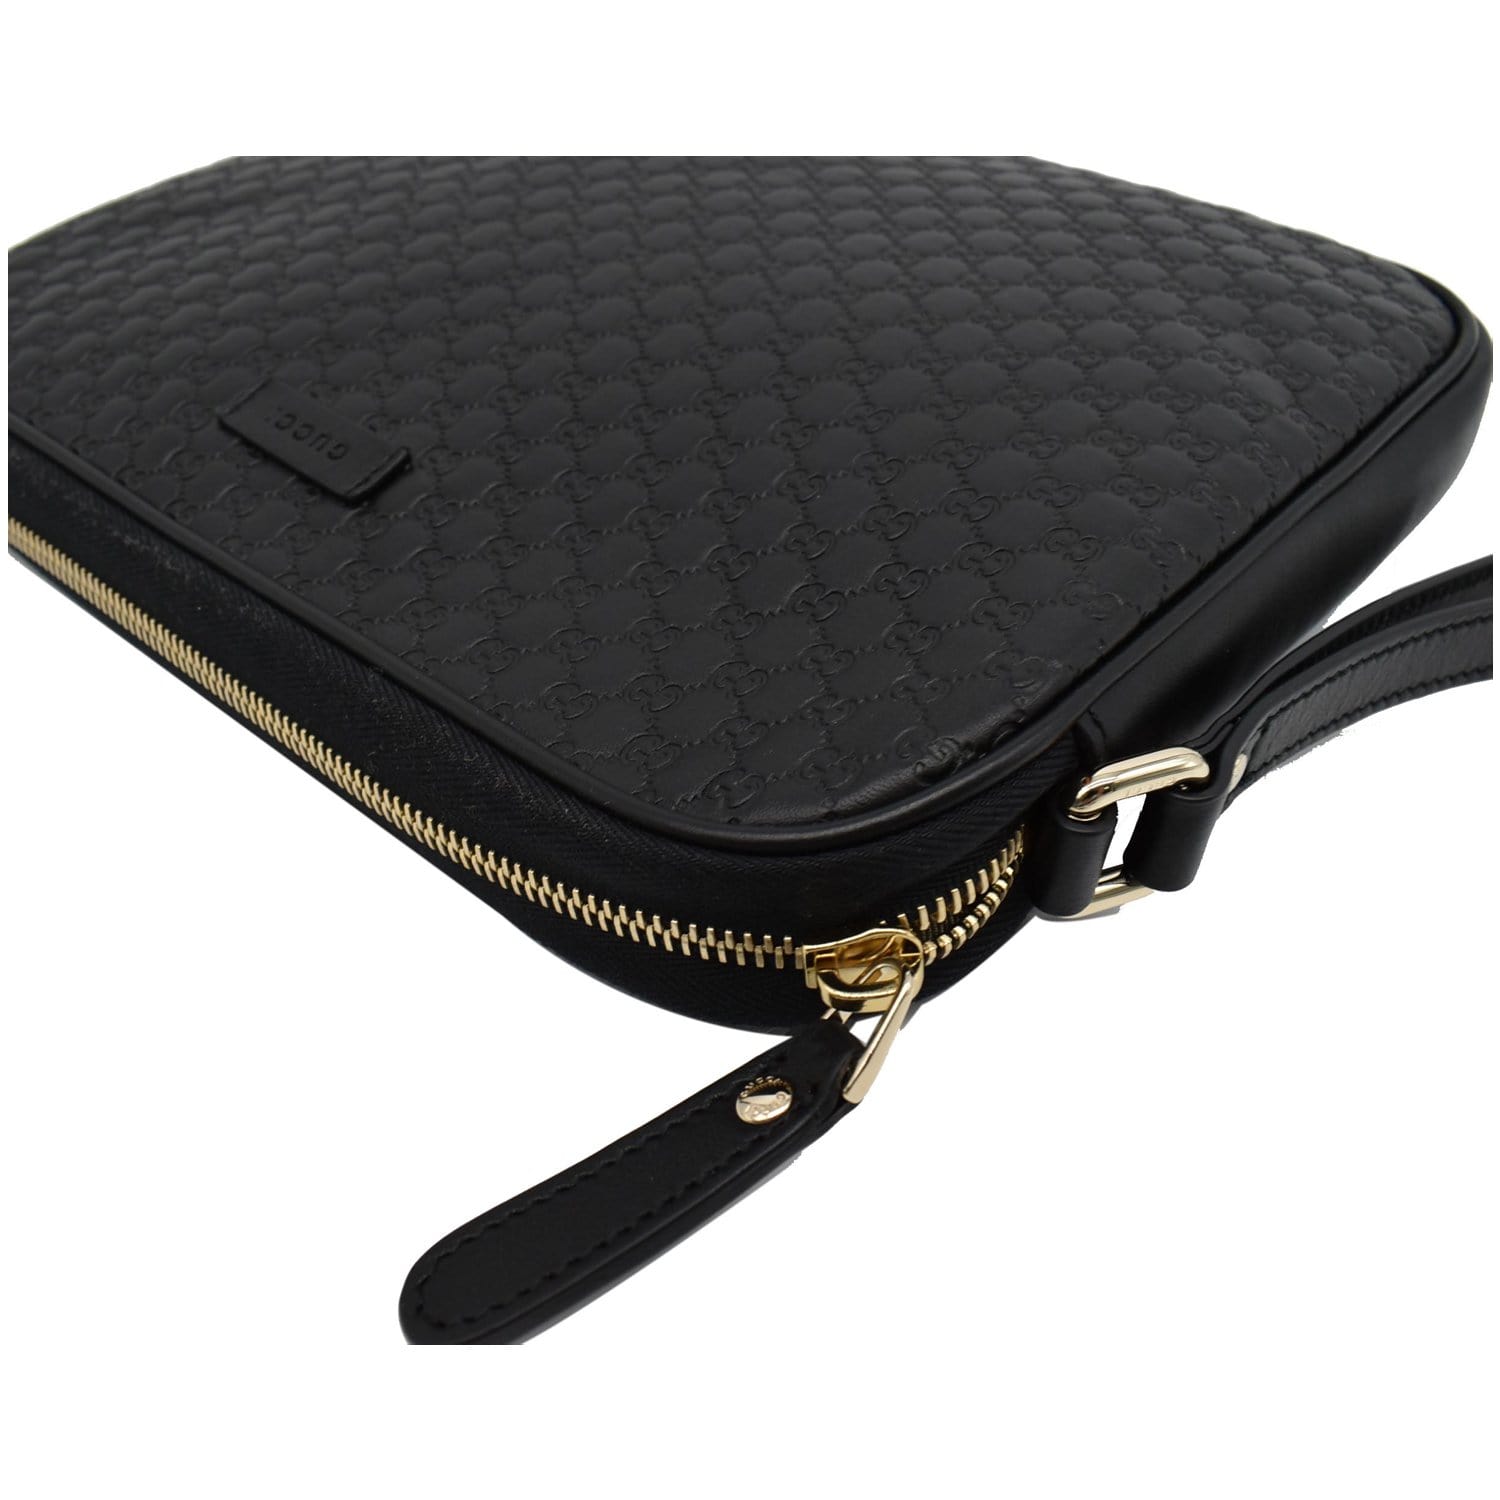 Leather clutch bag Gucci Black in Leather - 25517250